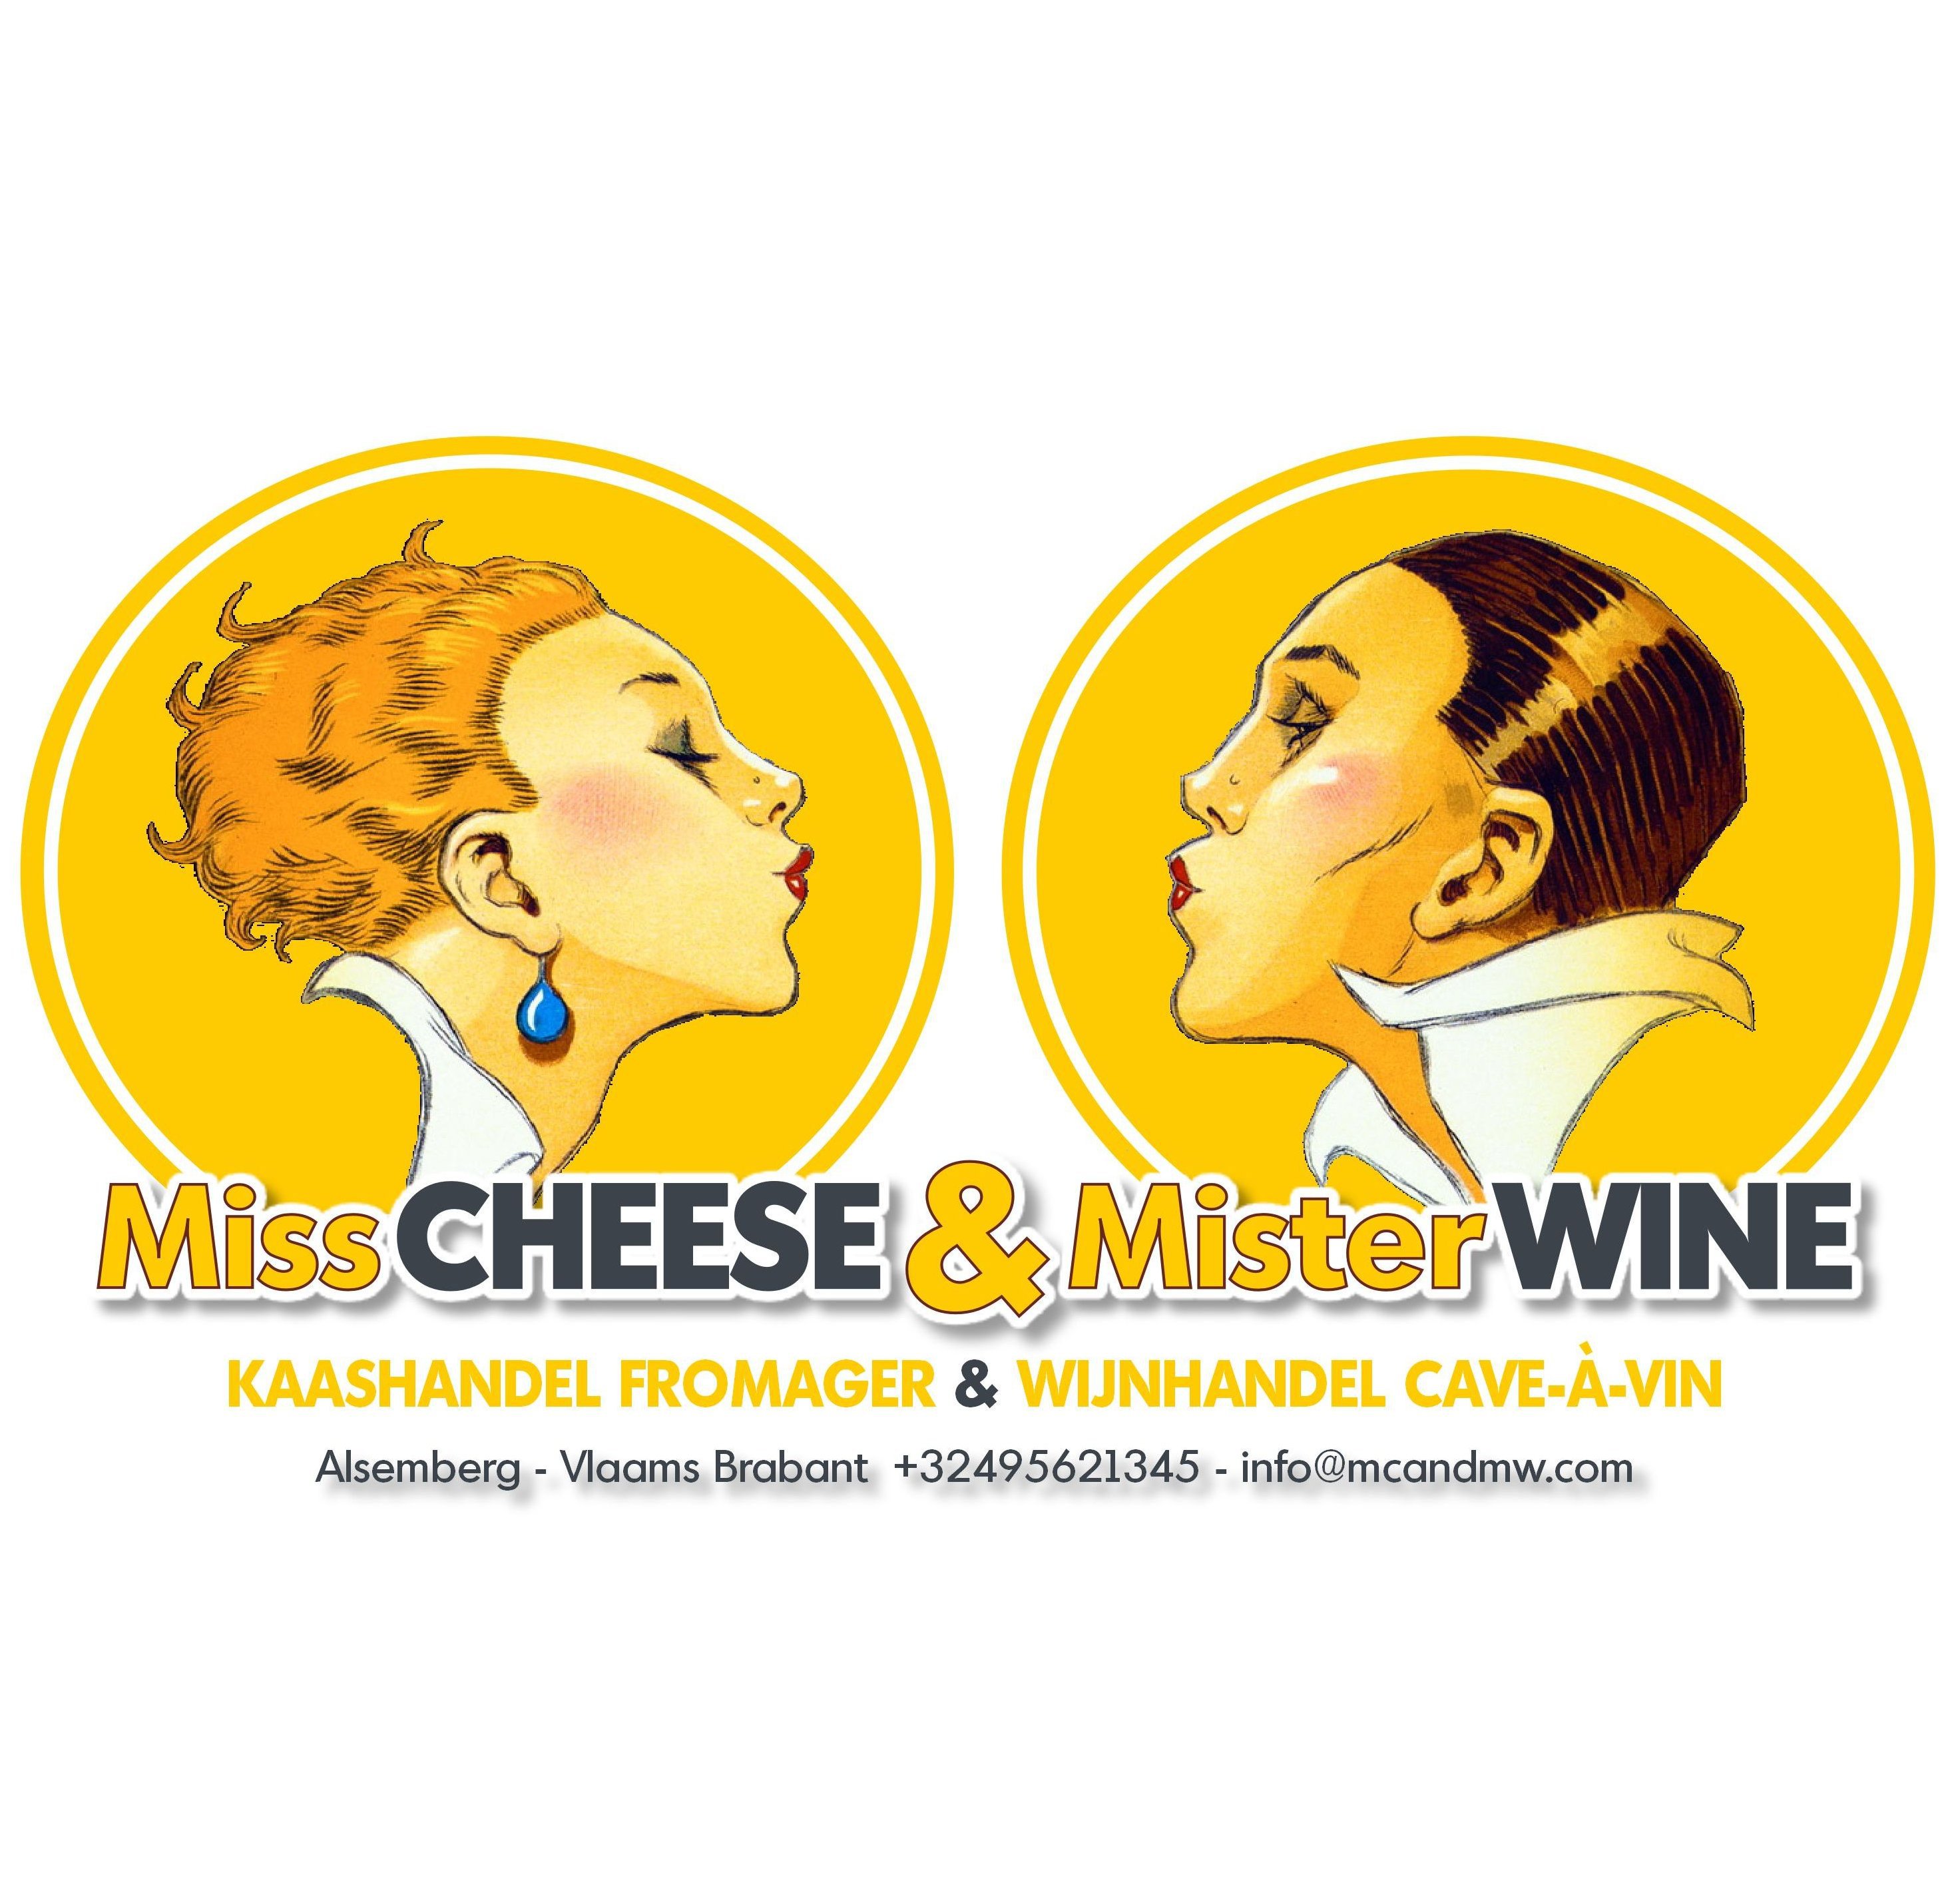 MISS CHEESE & MISTER WINE